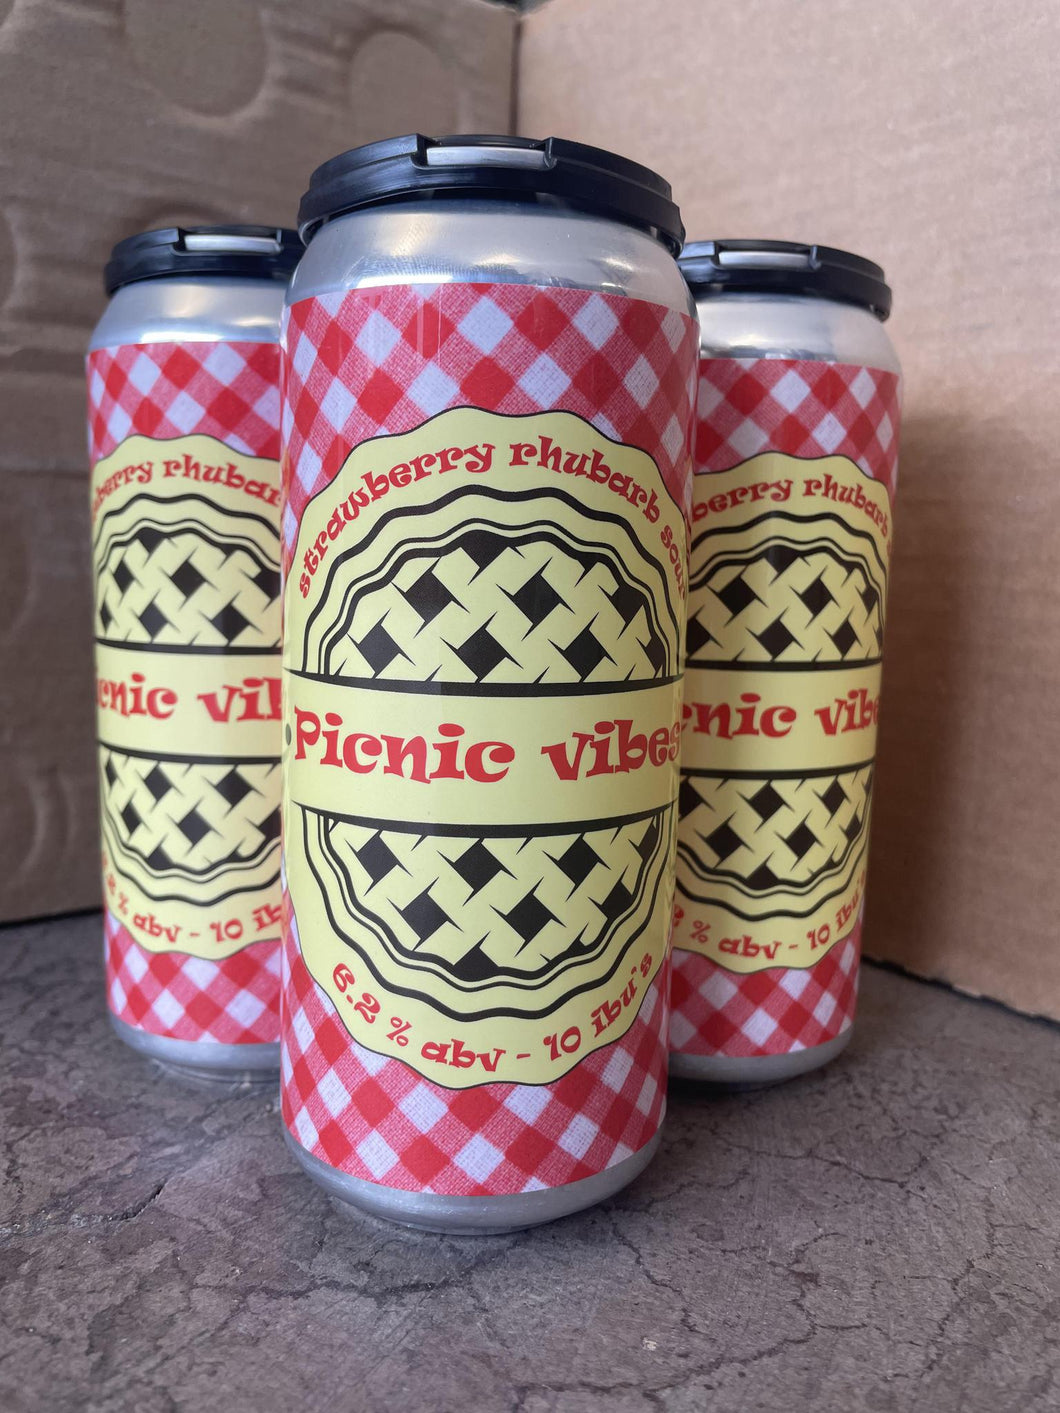 Picnic Vibes - Flying Basset Brewing - 16 oz Cans